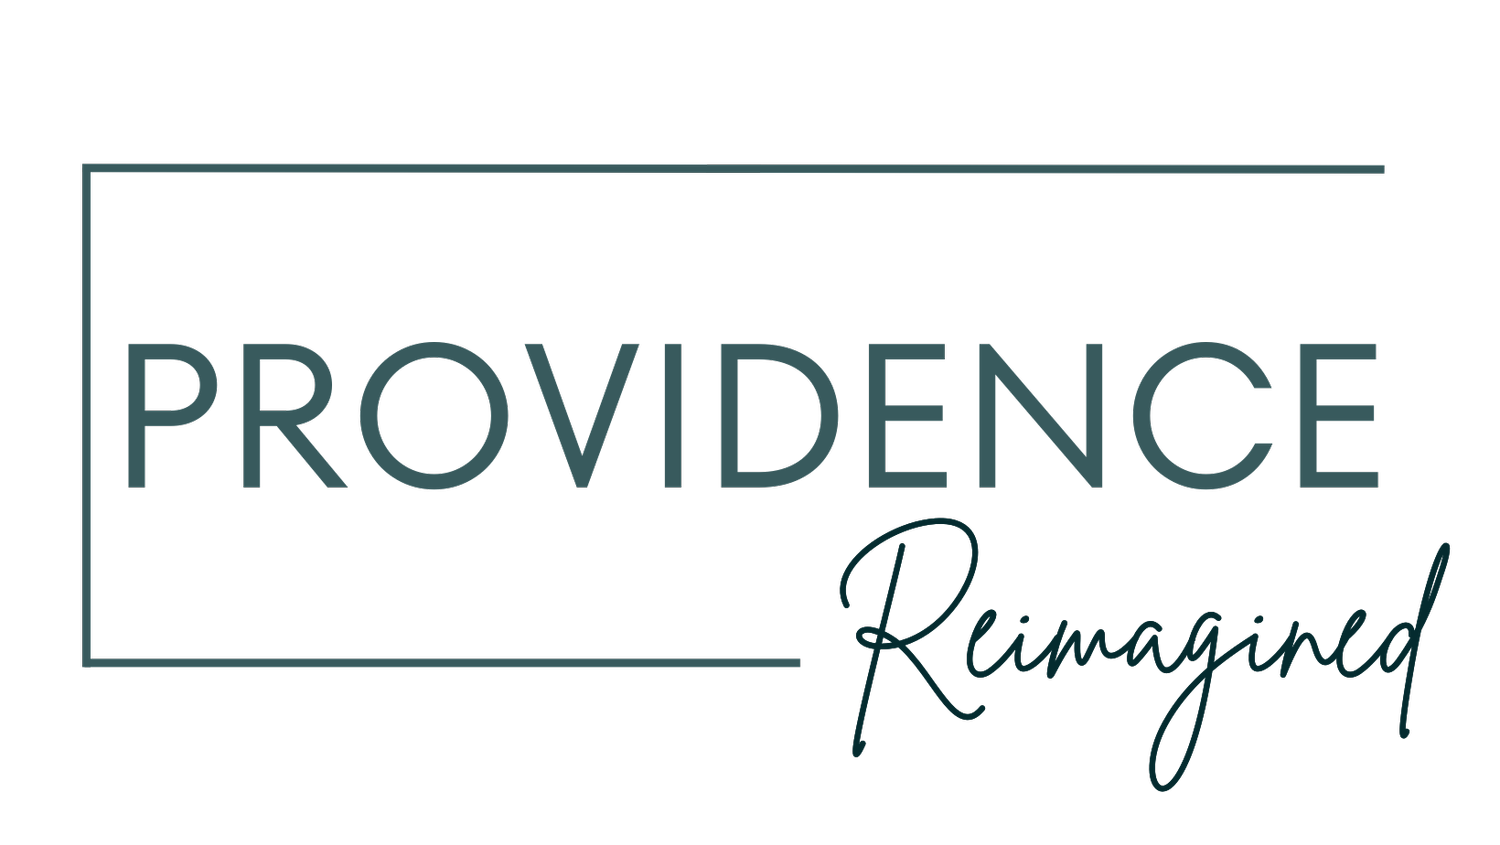 Providence Reimagined